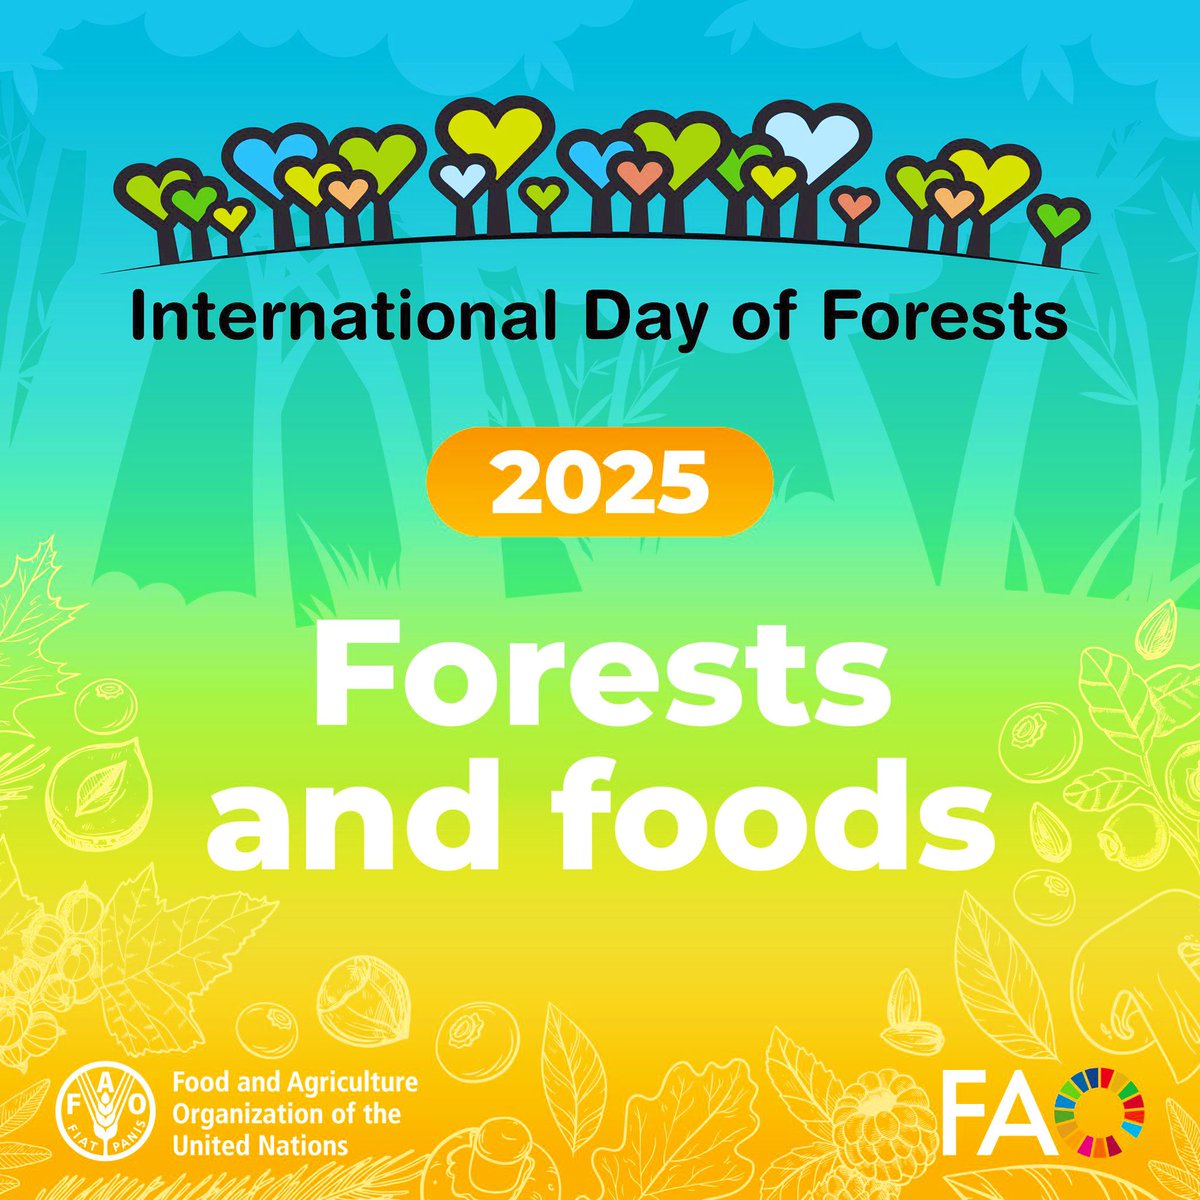 Mark your calendars! The theme for the International Day of Forests 2025 is 'Forests and Foods’. Stay tuned and follow @FAOForestry for ways to celebrate the vital role forests play in sustaining our food systems. #ForestDay #IntlForestDay #ForestsFeedUs #CPForests #UNFF19